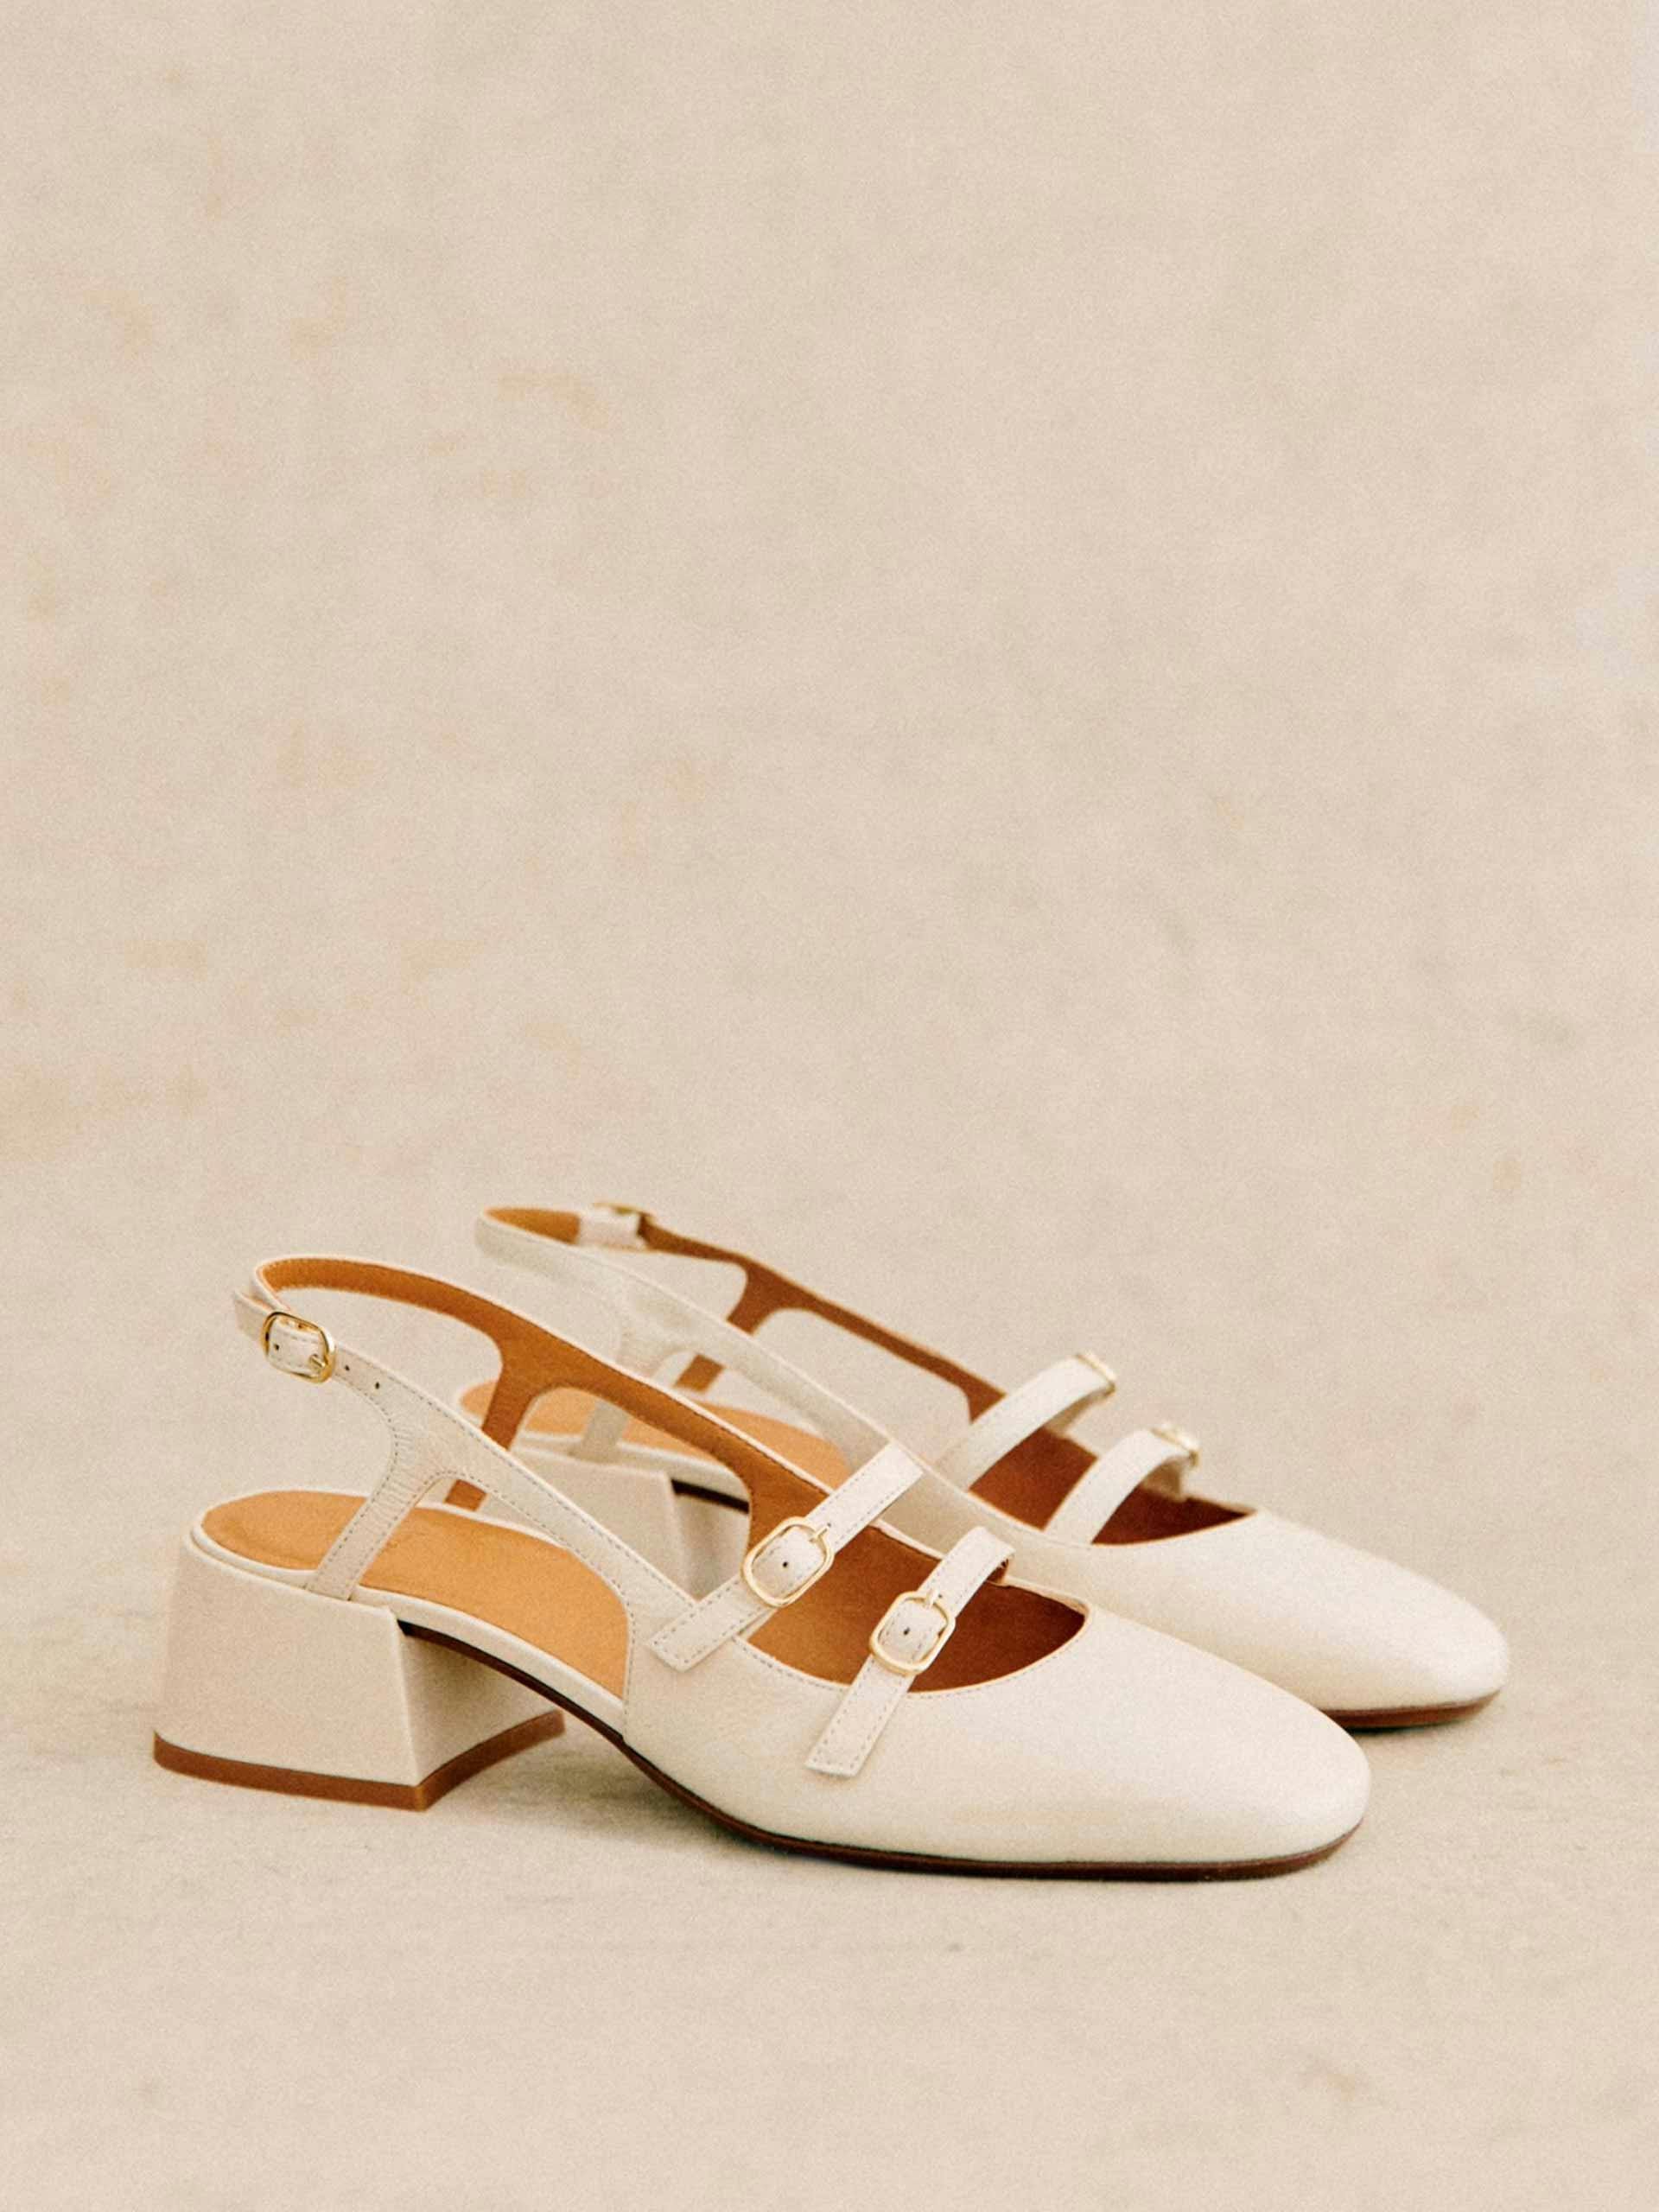 White patent leather buckled shoes